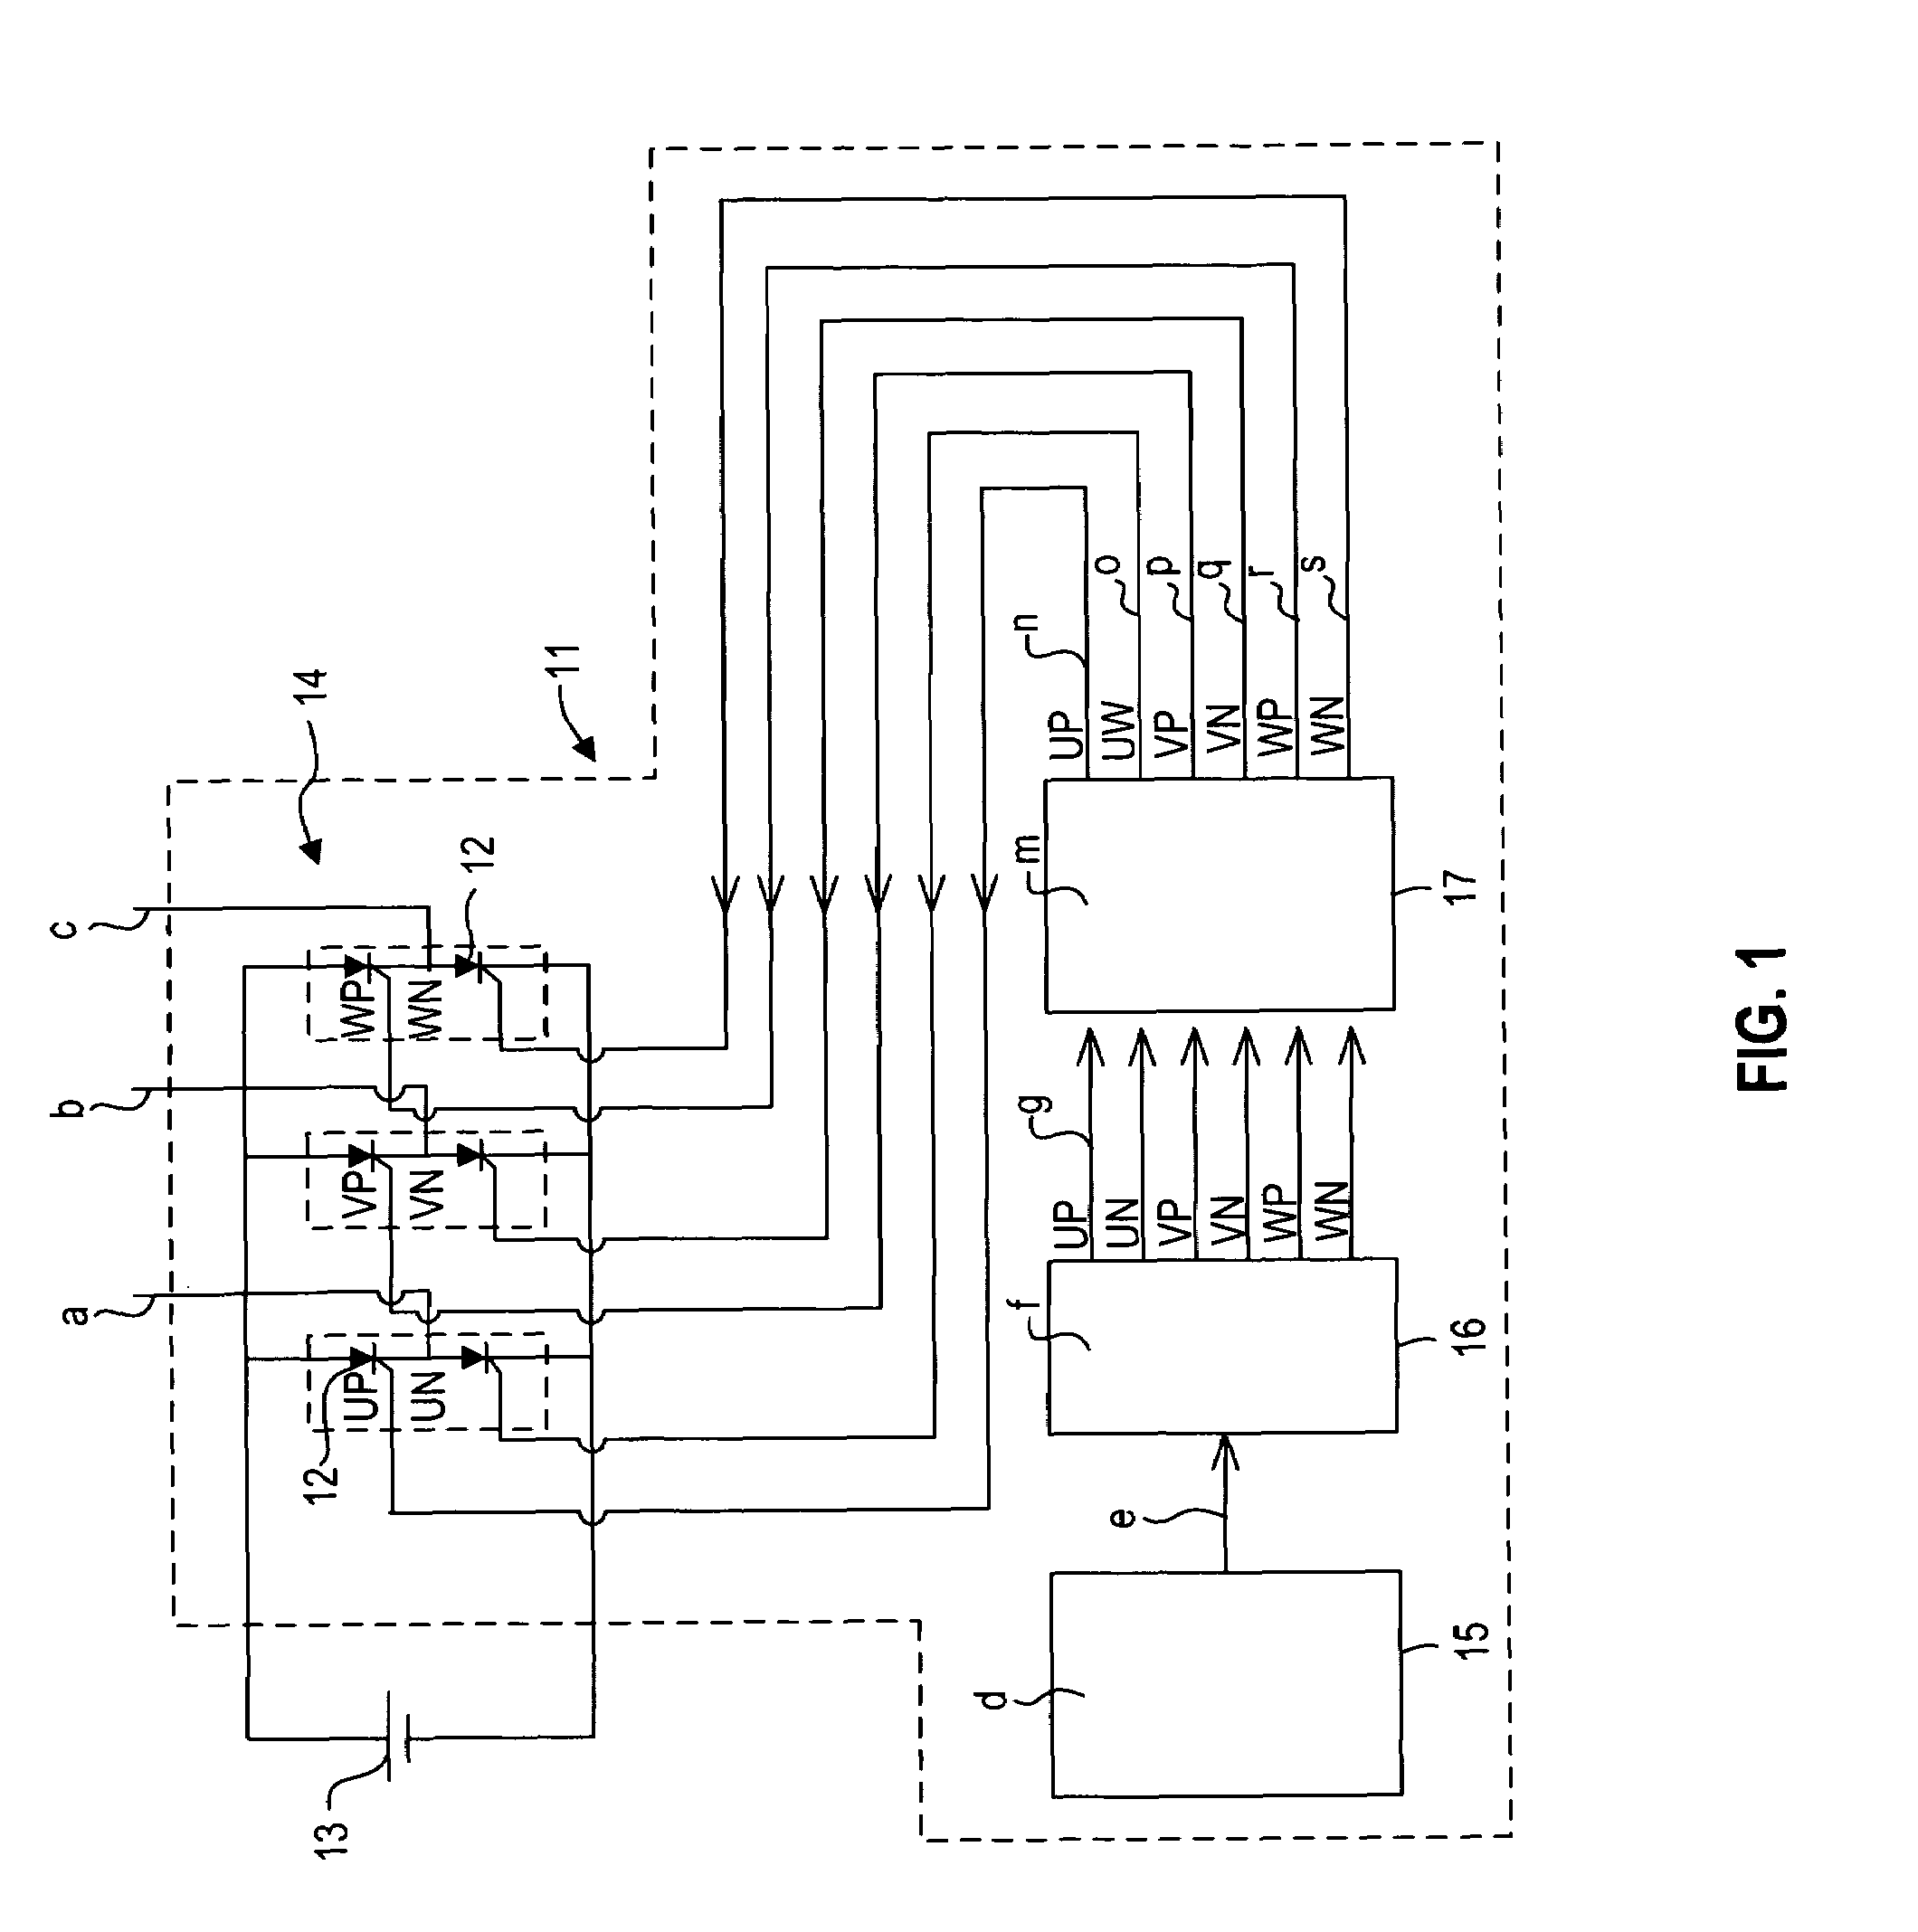 Inverter apparatus comprising switching elements